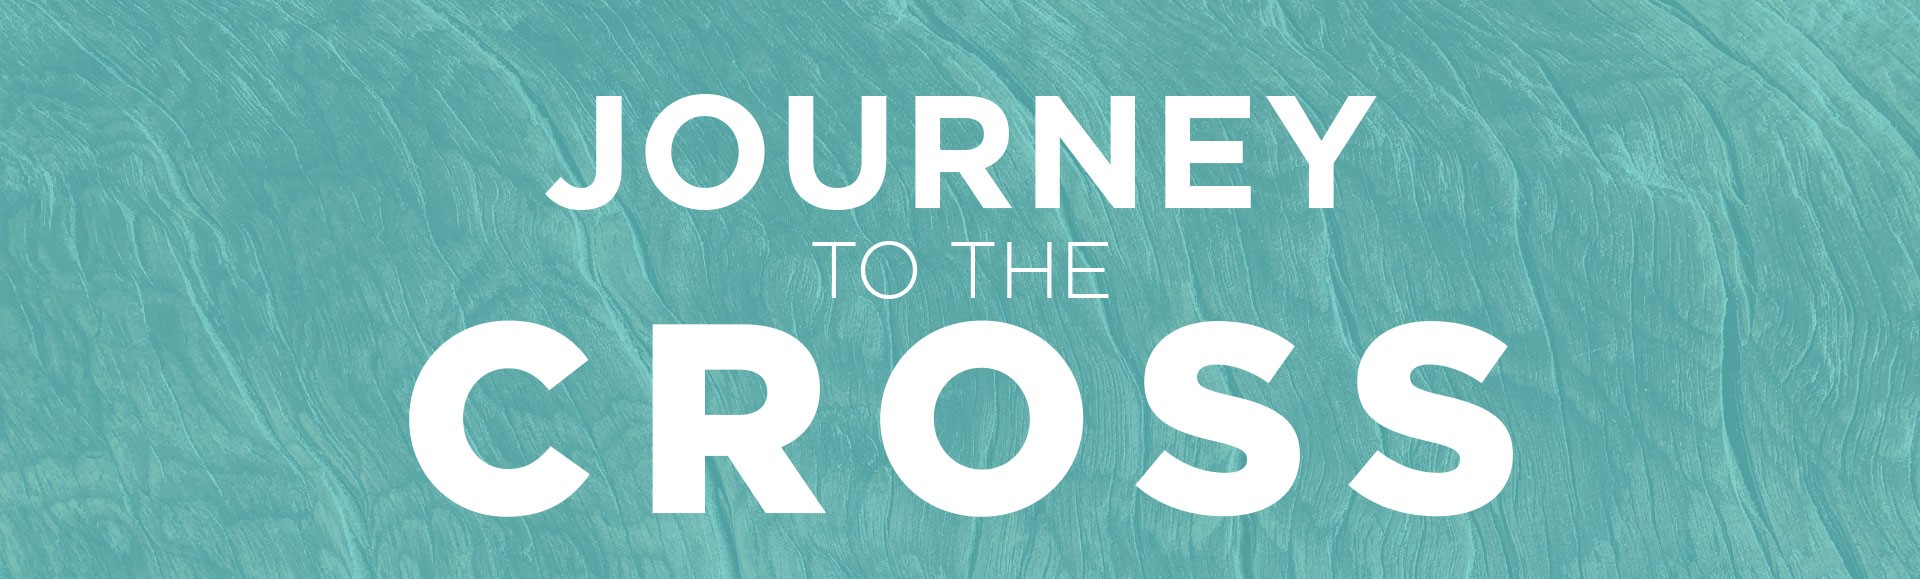 Journey to the Cross - Header